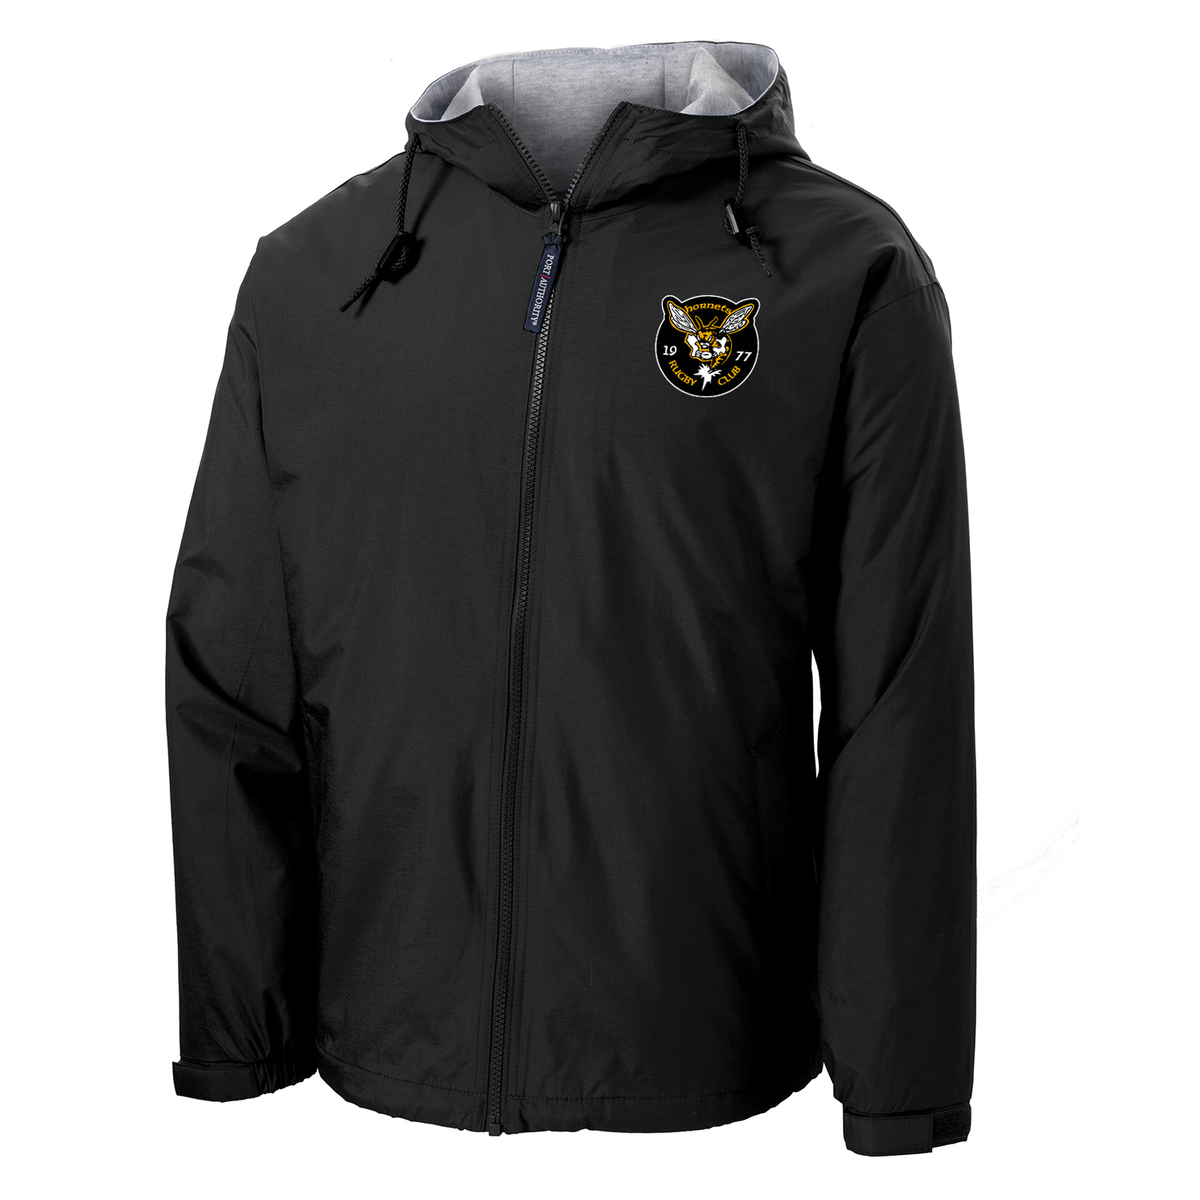 St. Louis Hornets Rugby Club Hooded Jacket